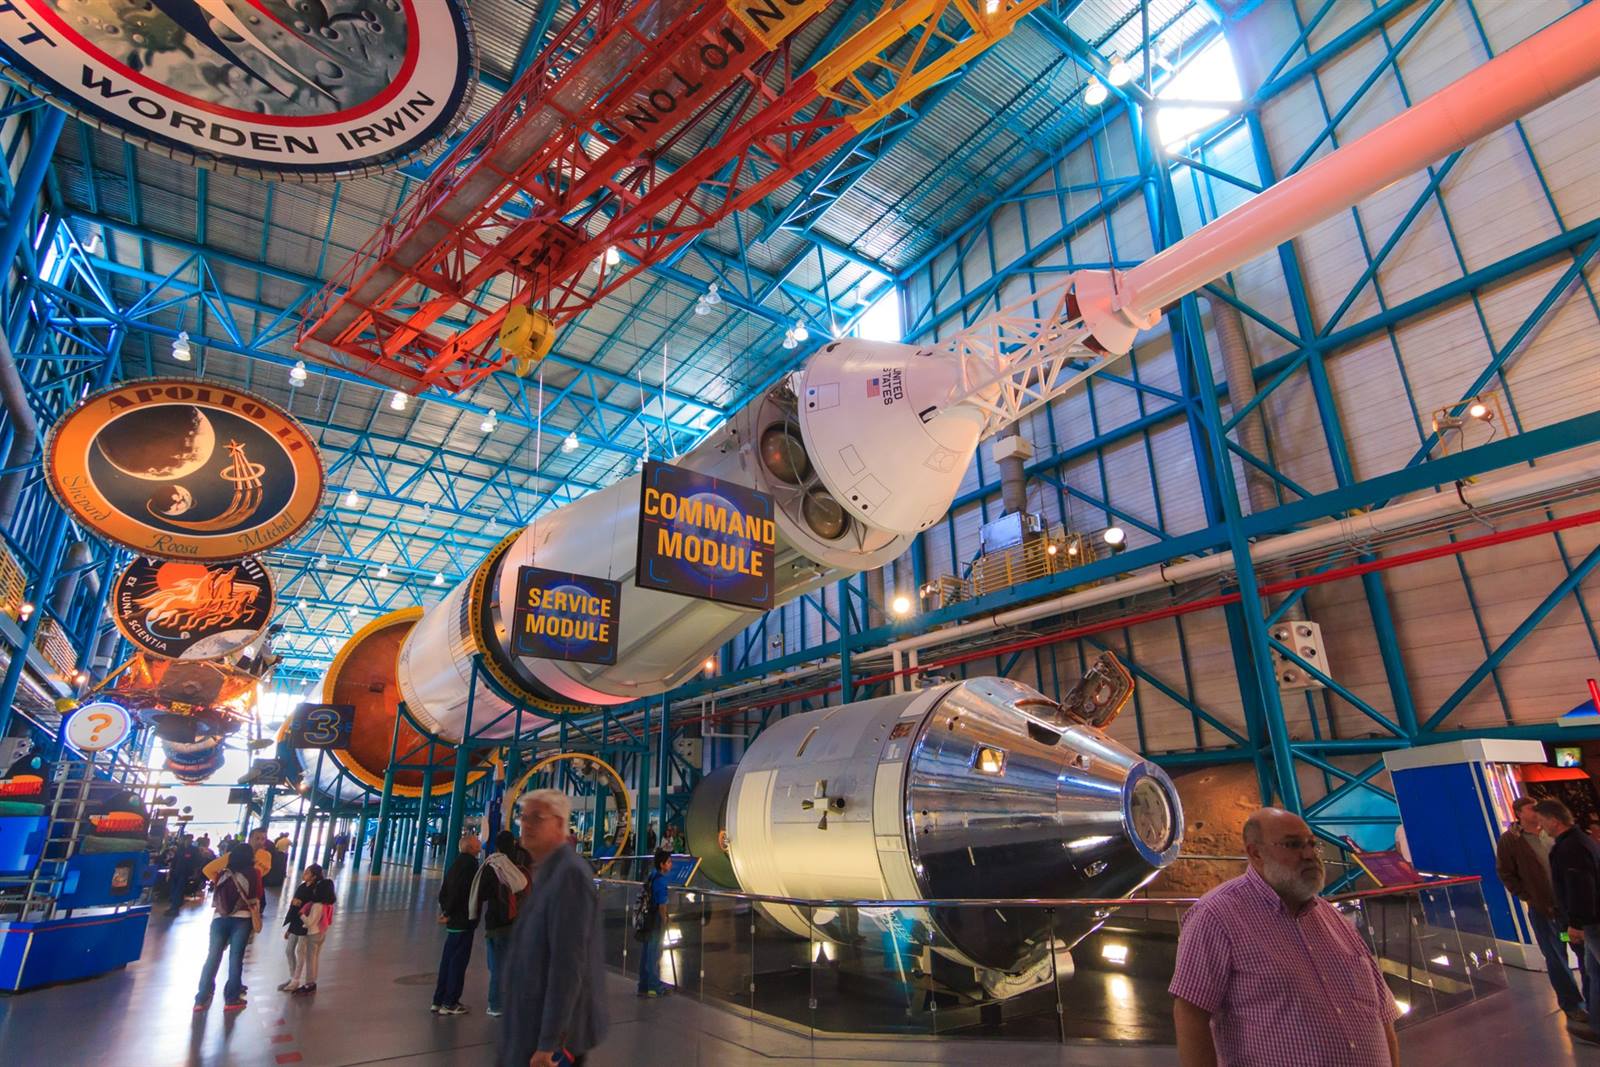 why visit kennedy space center